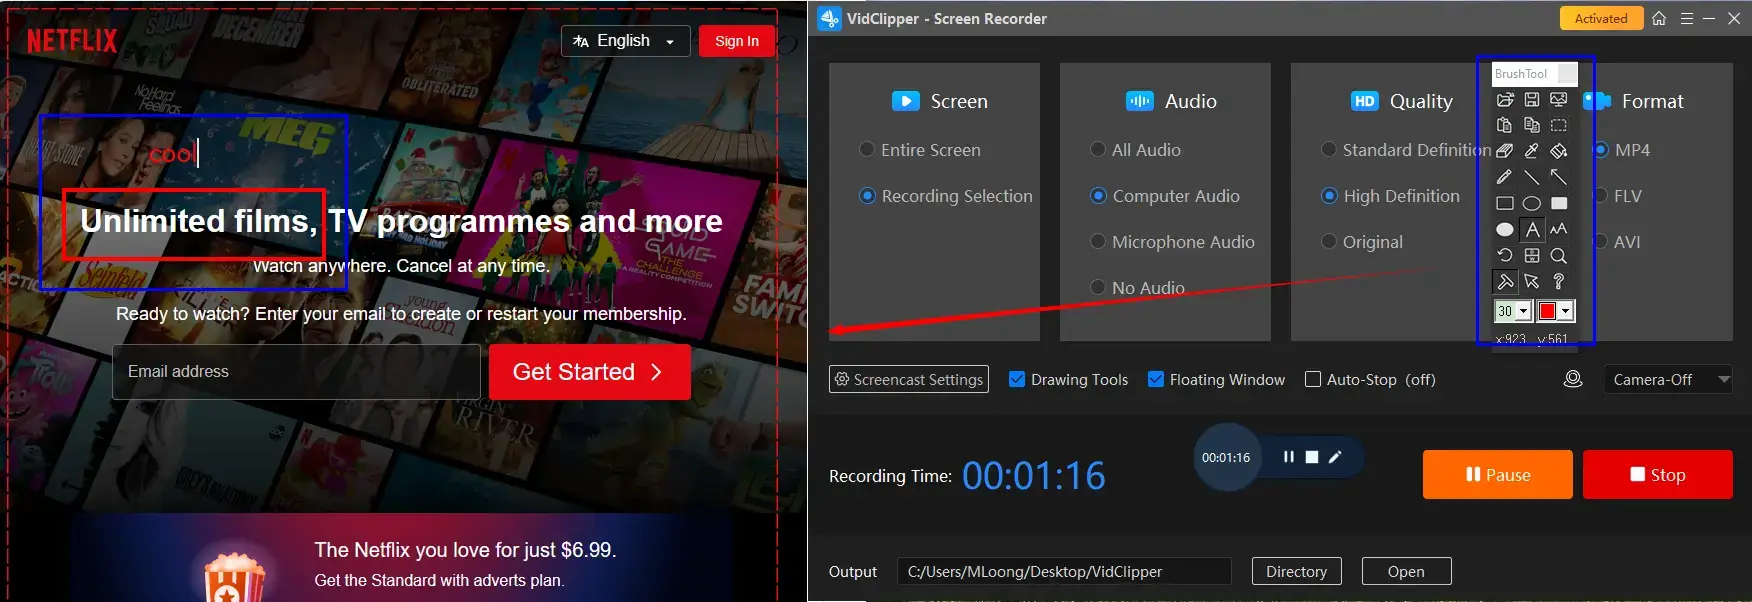 how to screen record on netflix with workintool capture screen recorder 1